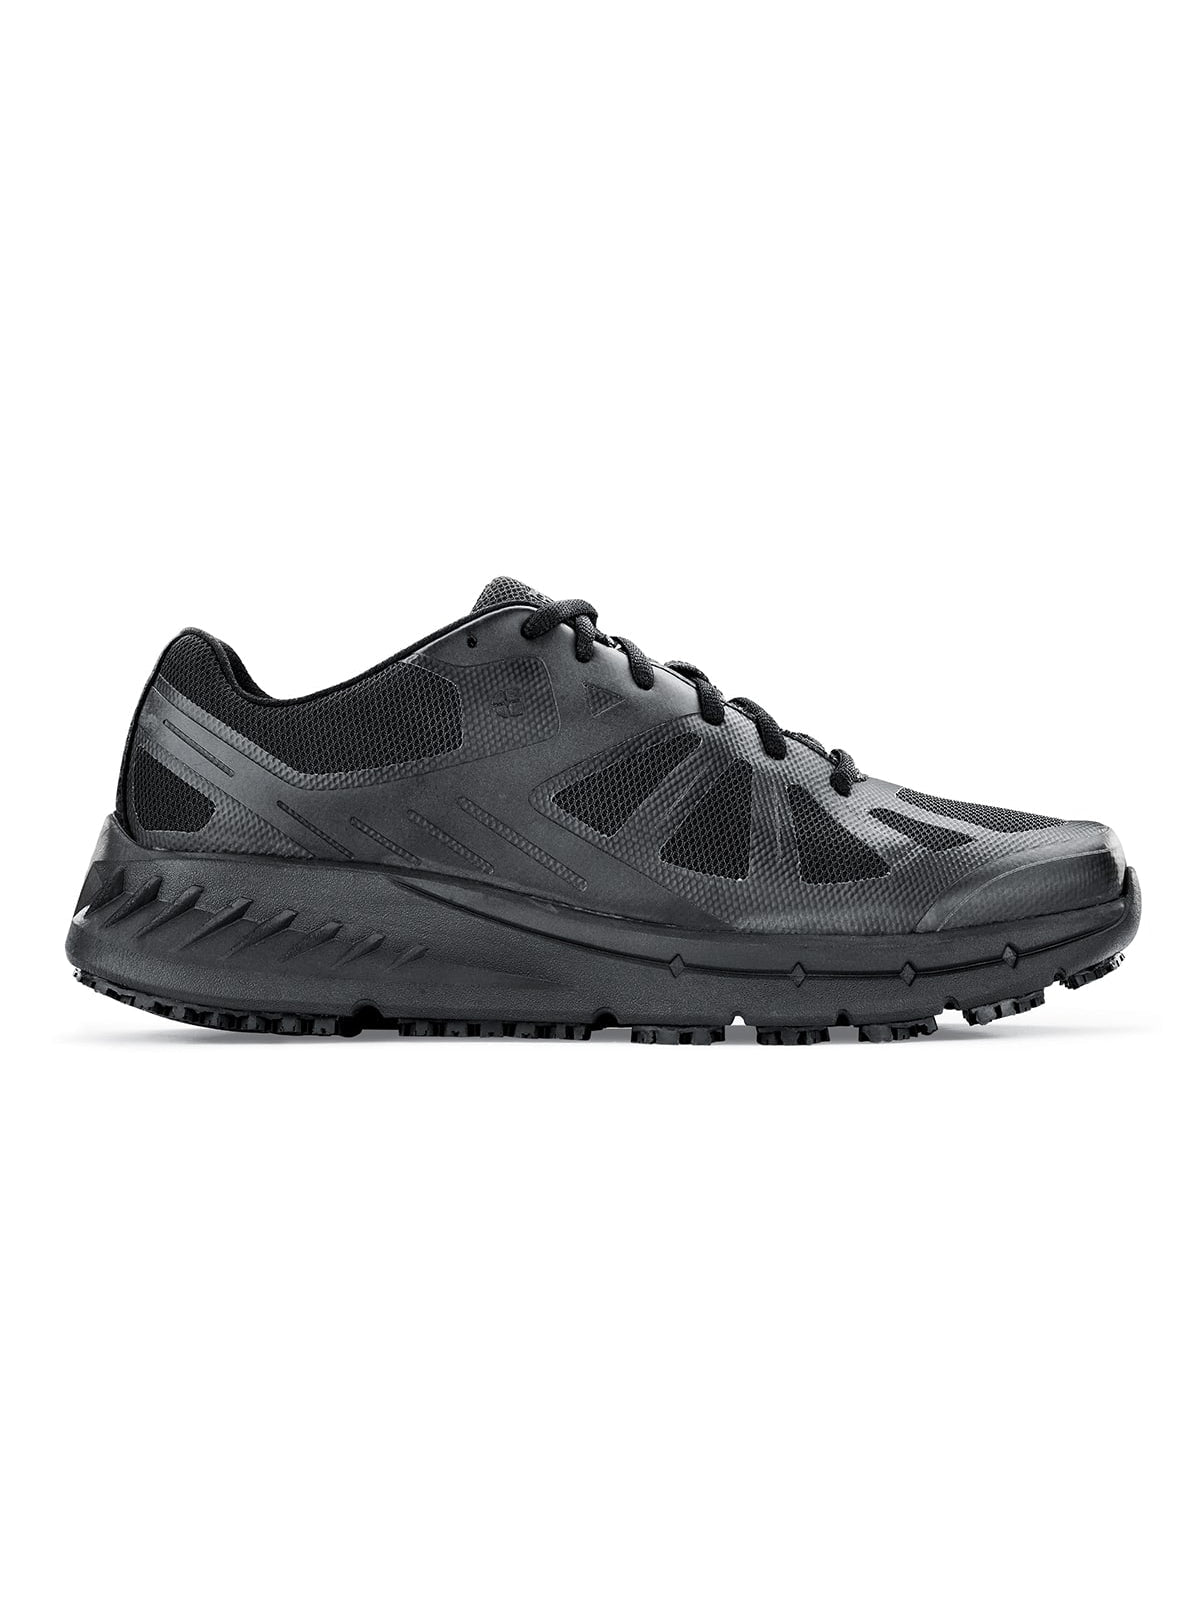 Men's Work Shoe Endurance II by Shoes For Crews -  ChefsCotton